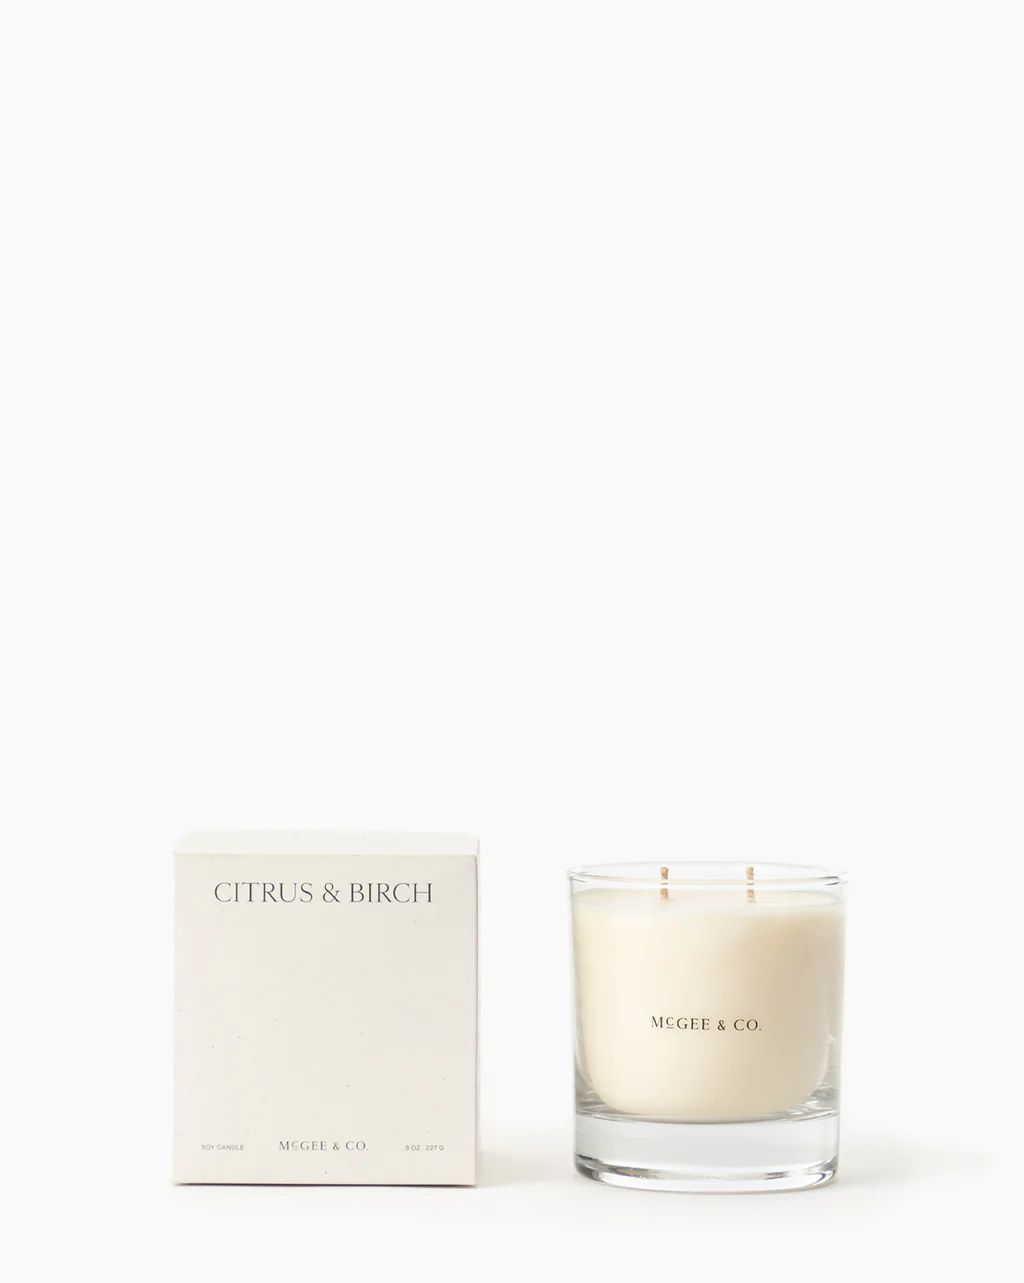 Citrus & Birch Candle | McGee & Co.